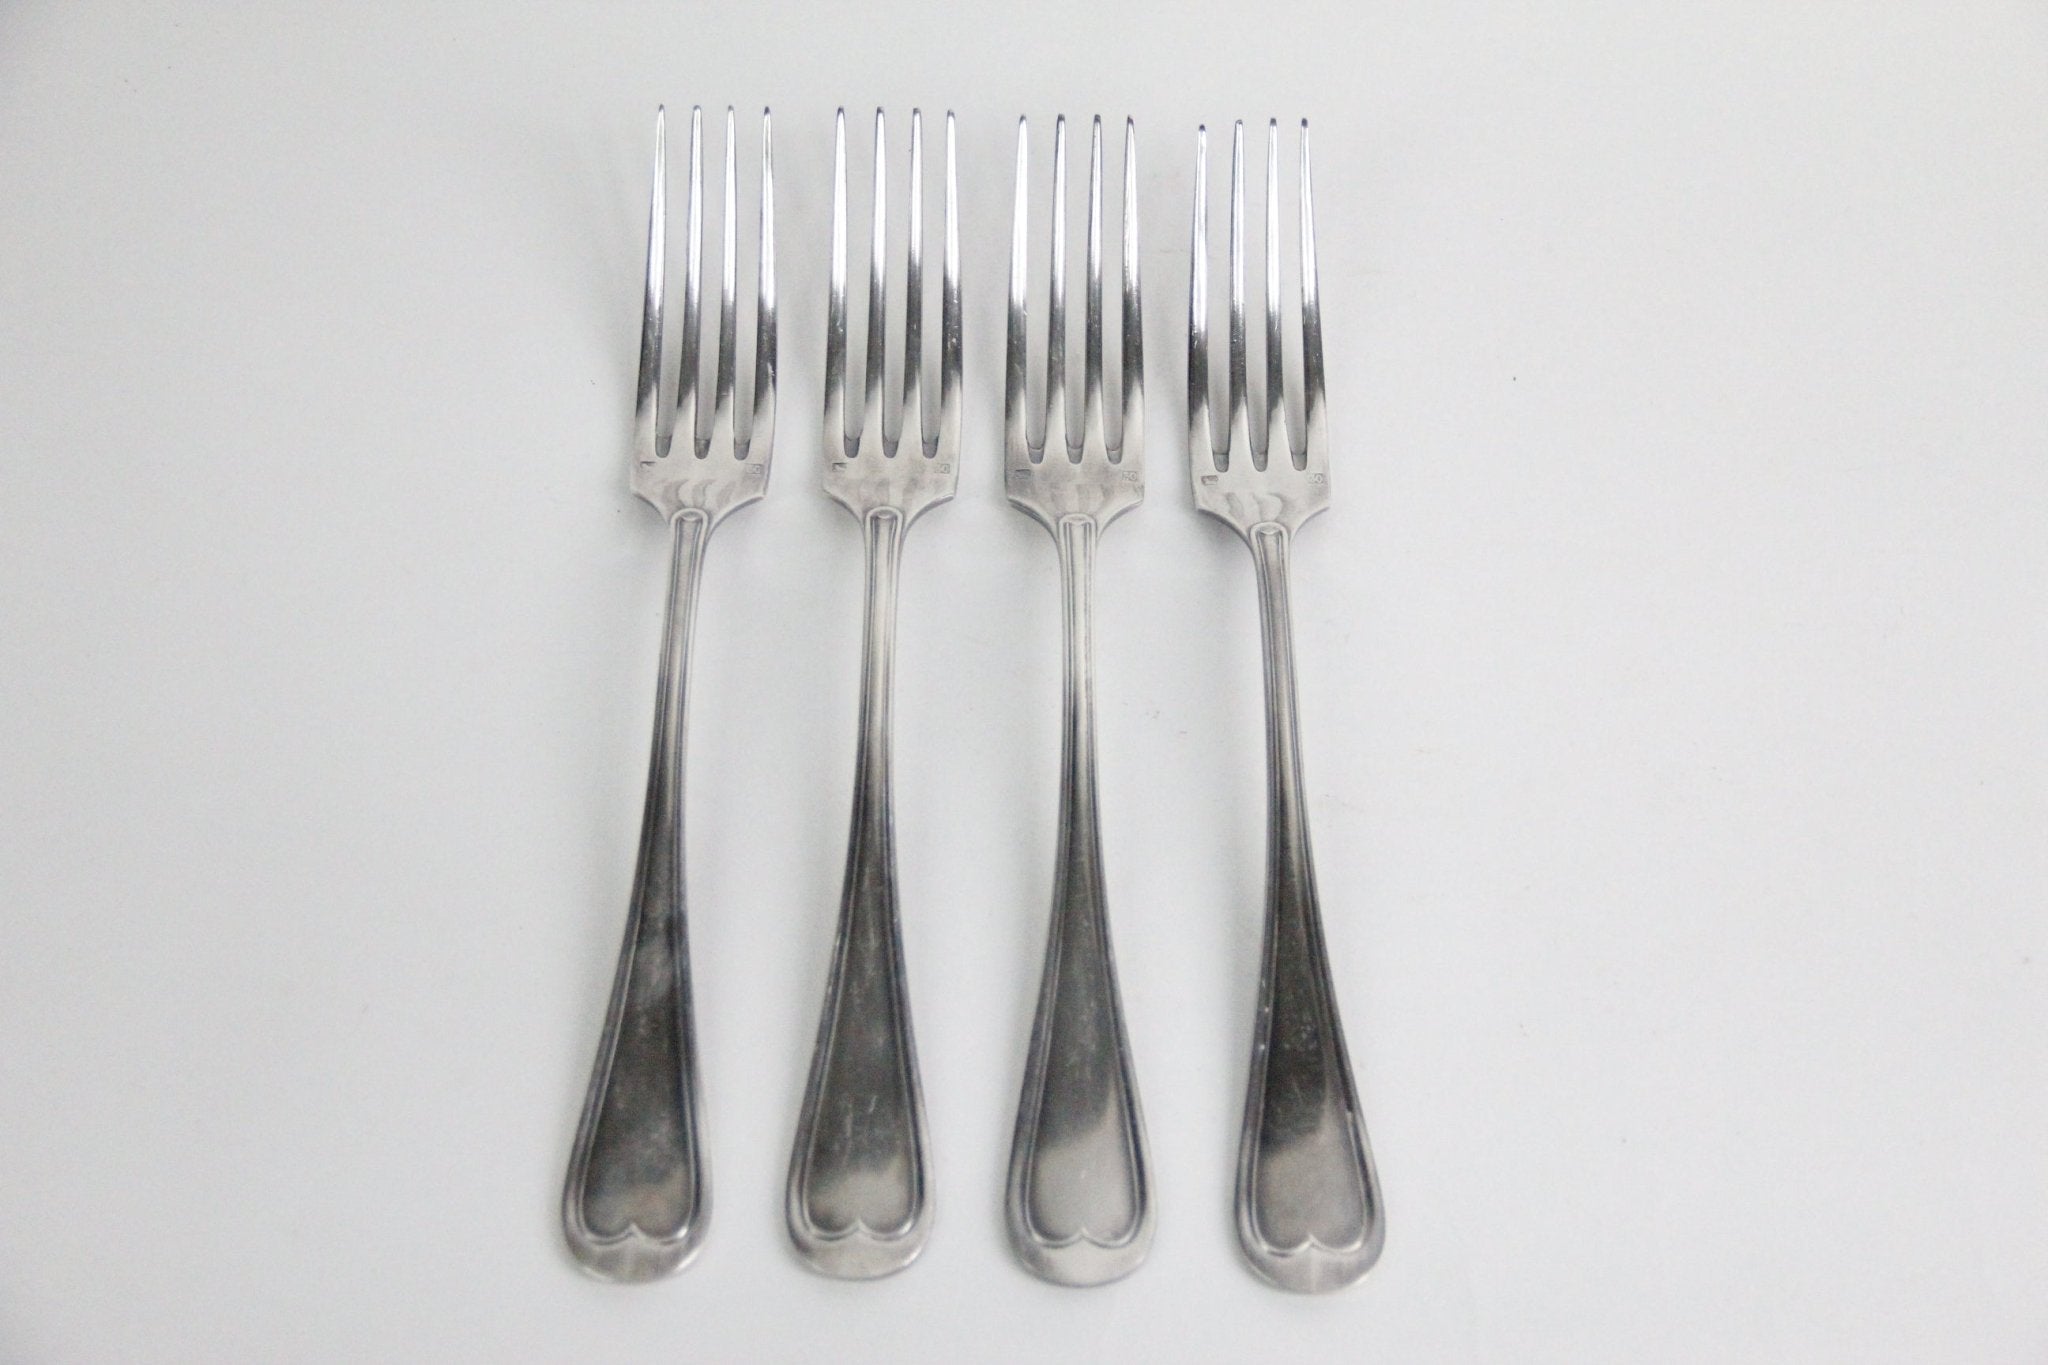 Antique Silver Flatware | French Forks - Debra Hall Lifestyle